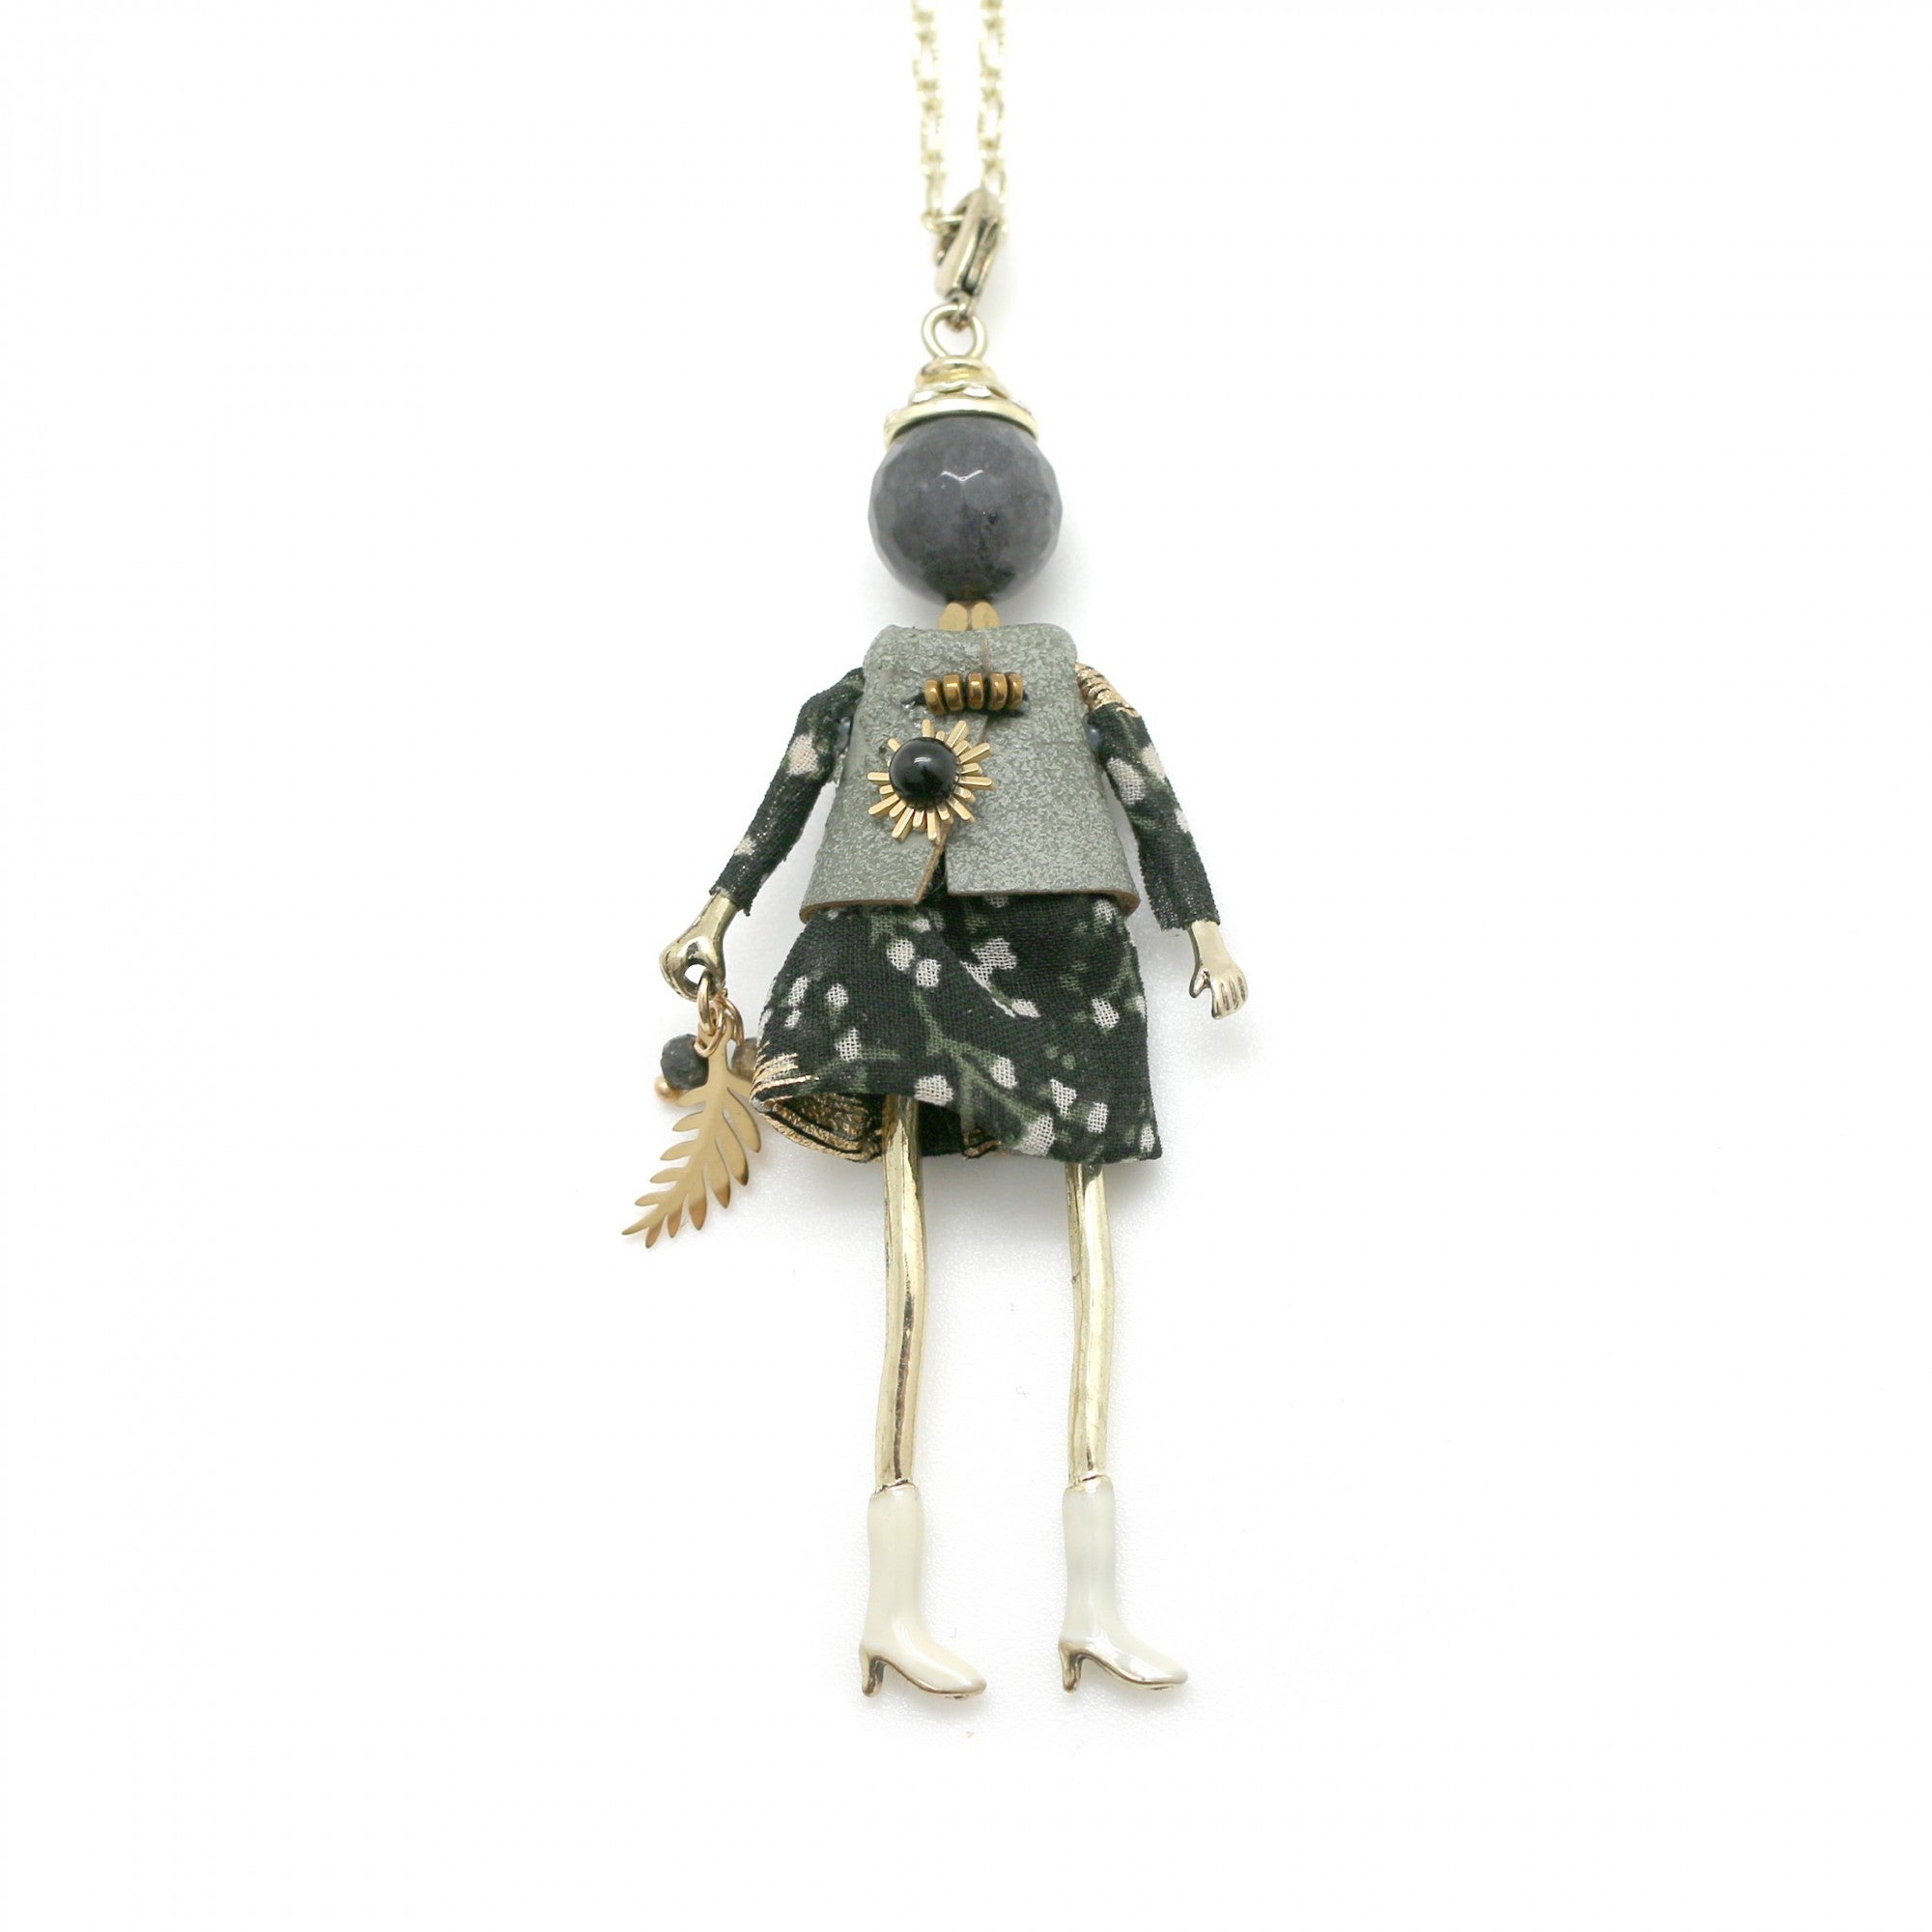 Moon C Small Doll Pendant on a Long Chain, Agate, Fabric, Metal / Grey, Black / 3 Inches / Gift Idea